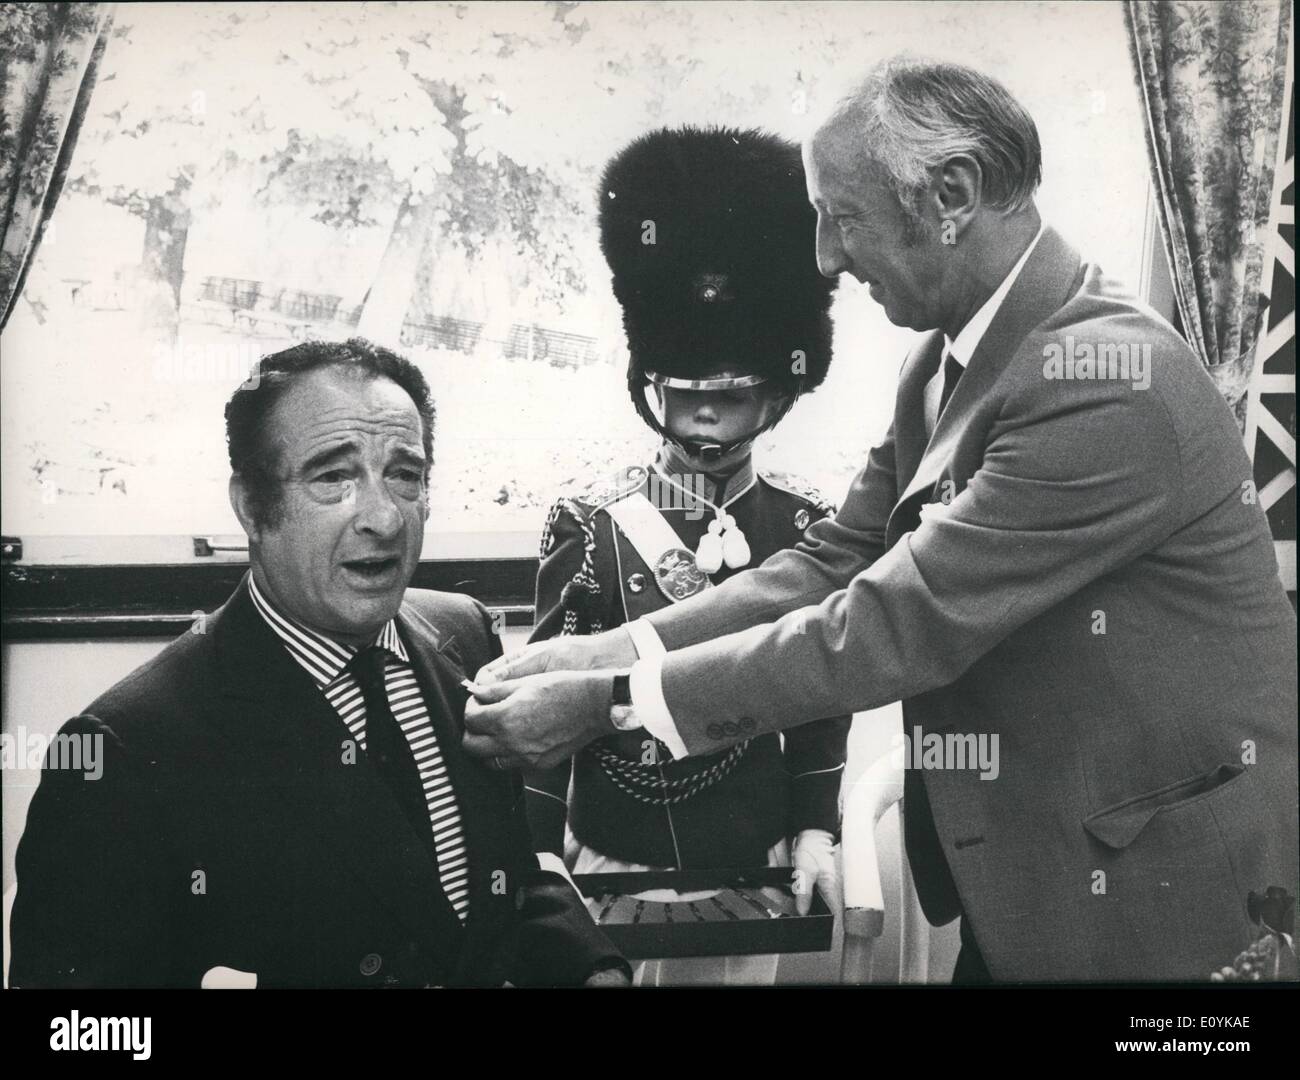 Aug. 08, 1970 - Tivoli's ''Golden Key'' to Victor Borge: Tivoli is world-famous. For its beautiful park and for its entertainment. Not to forget the Tivoli Variete, where artists from all countries have been performing. Marlene Dietrich, Josephine Baker, Eartha Kitt, and now Victor Borge. Tivolis golden key is given to an artist have a special connection to Tivoli. This key has been given to Marlene Dietrich and now to Victor Borge, who is performing in the Variete with fantastic success Stock Photo